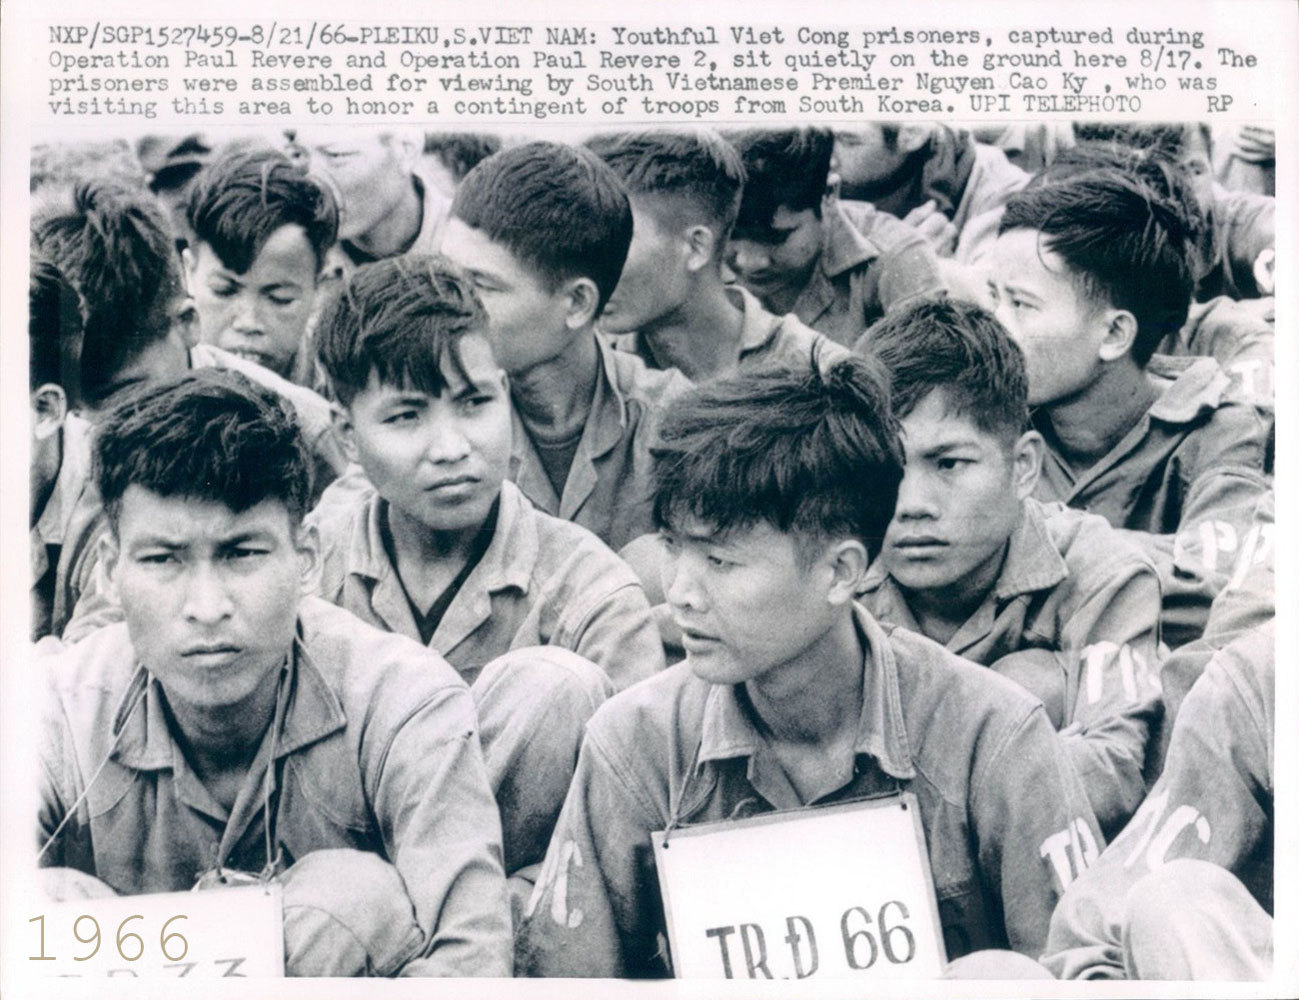 an old po of boys in uniforms holding signs